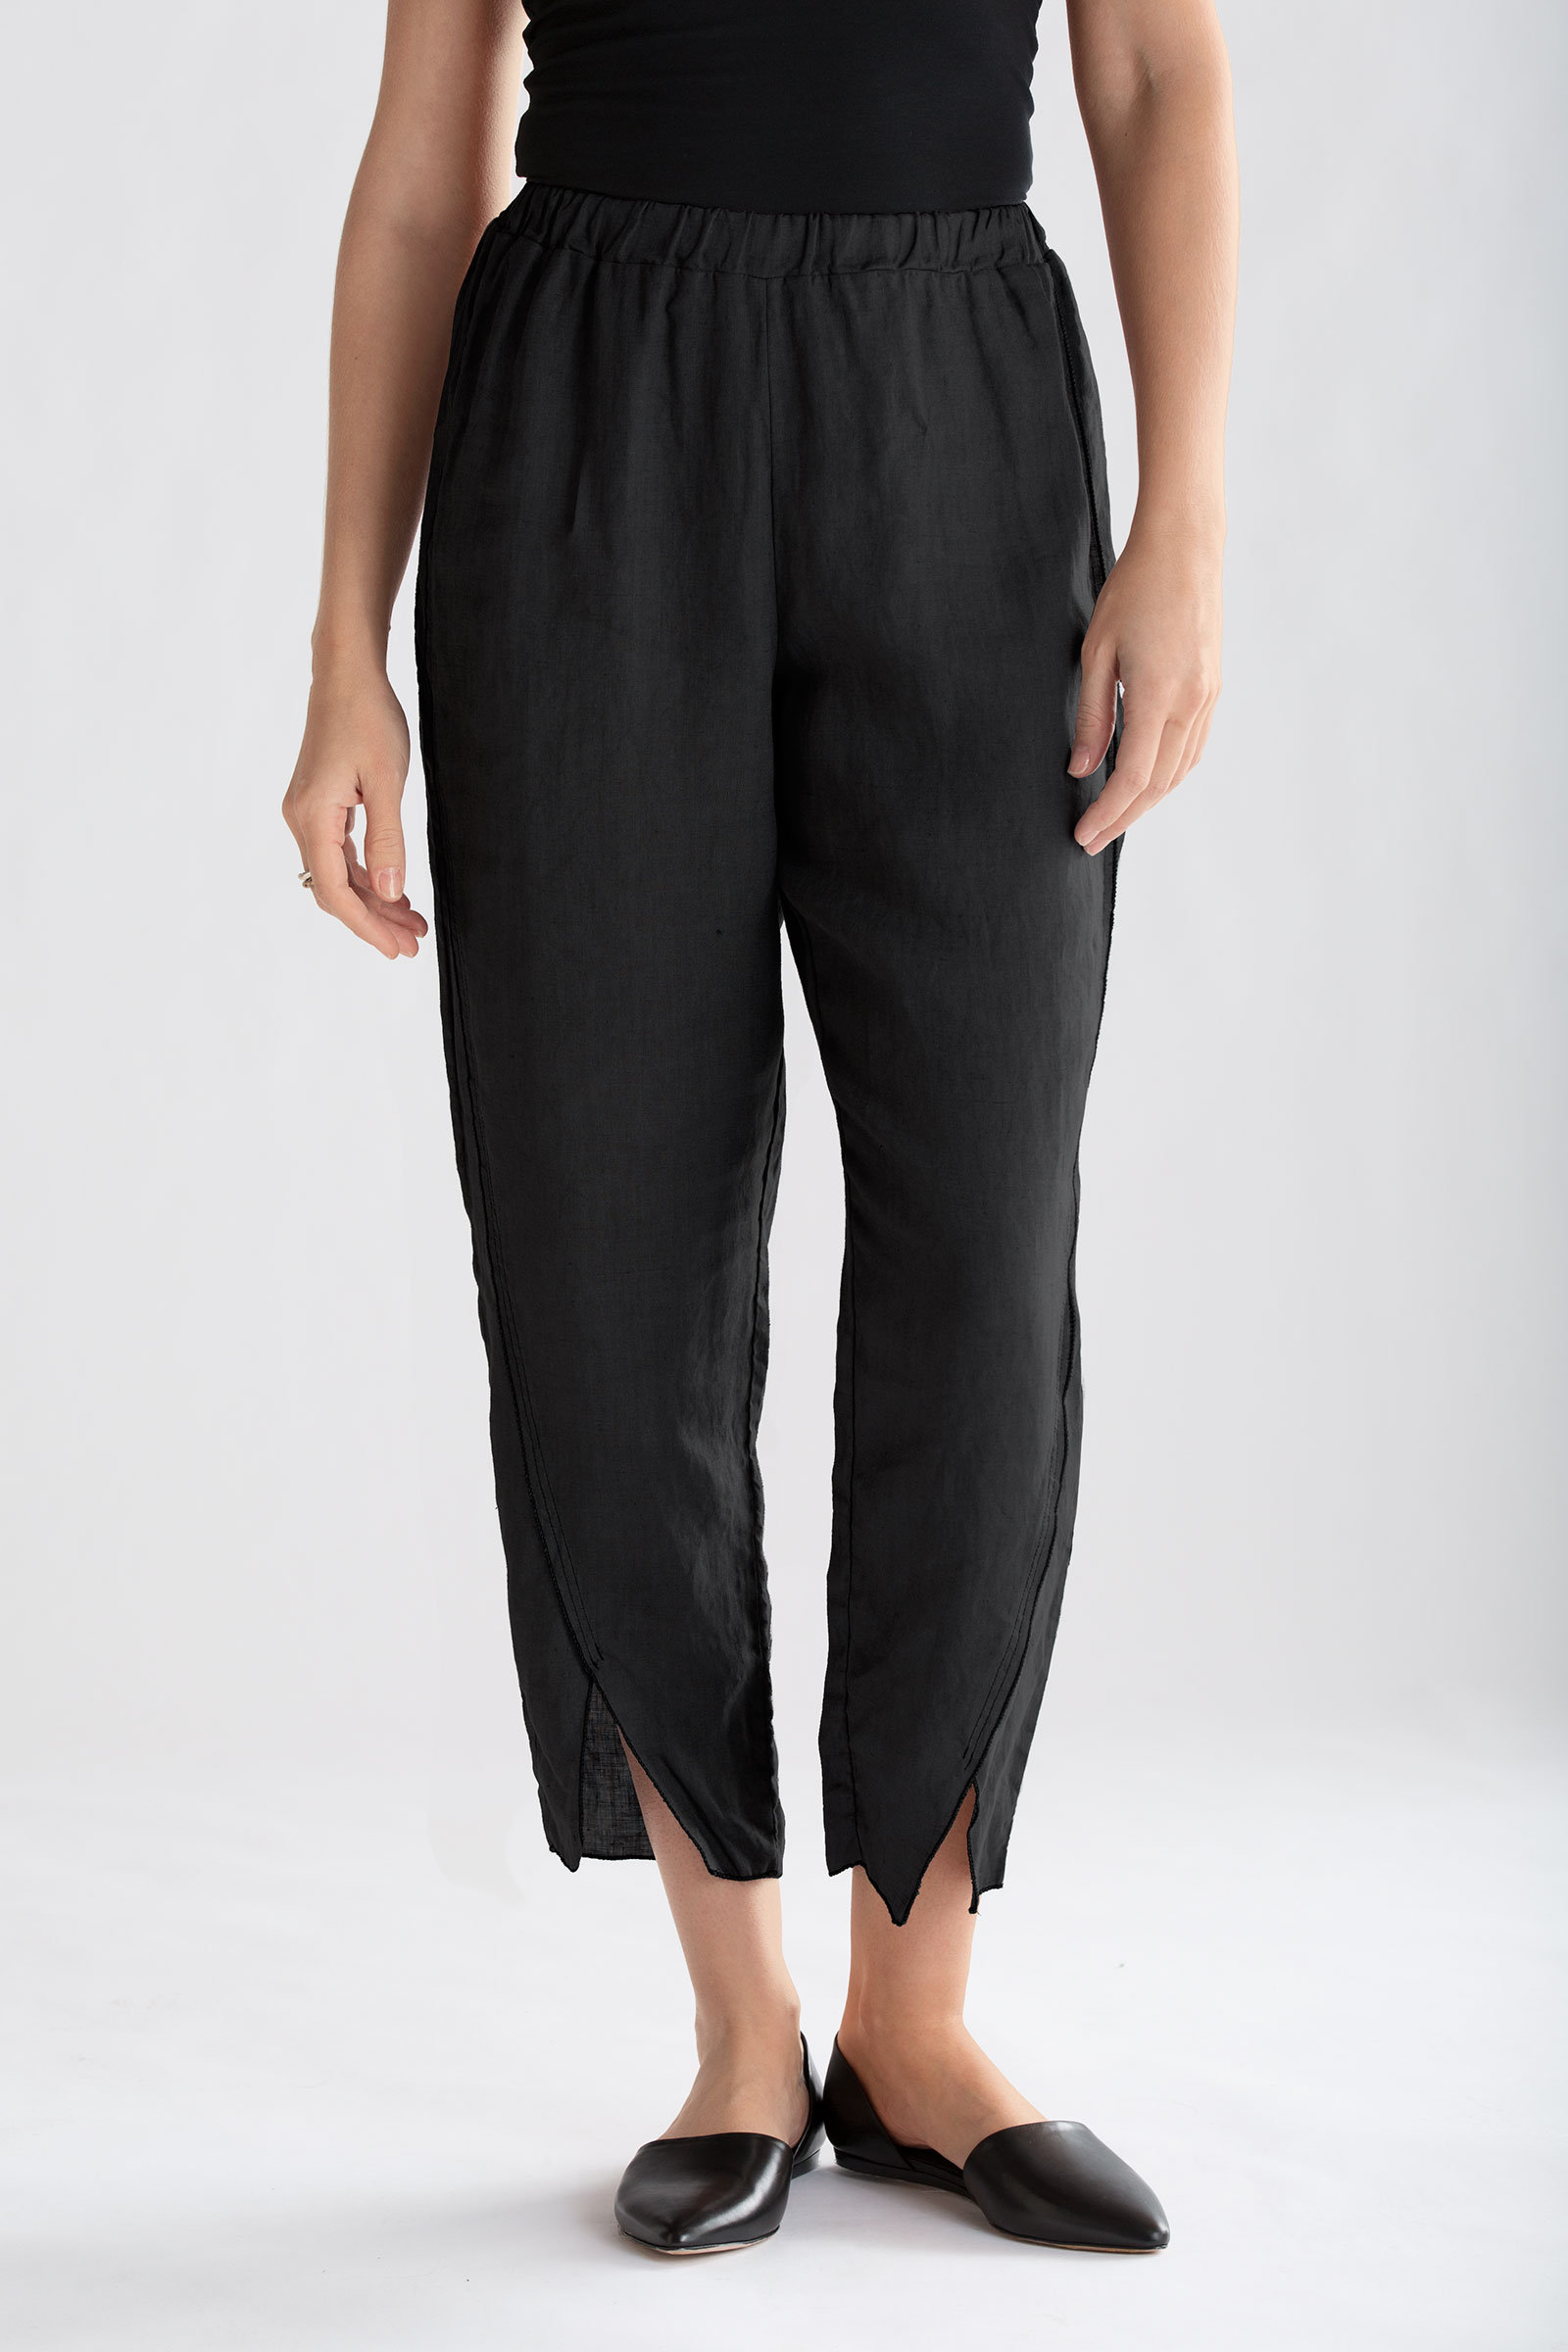 Taper Pant (Size 4-6 and 8-10) by Cynthia Ashby (Linen Pant) | Artful Home